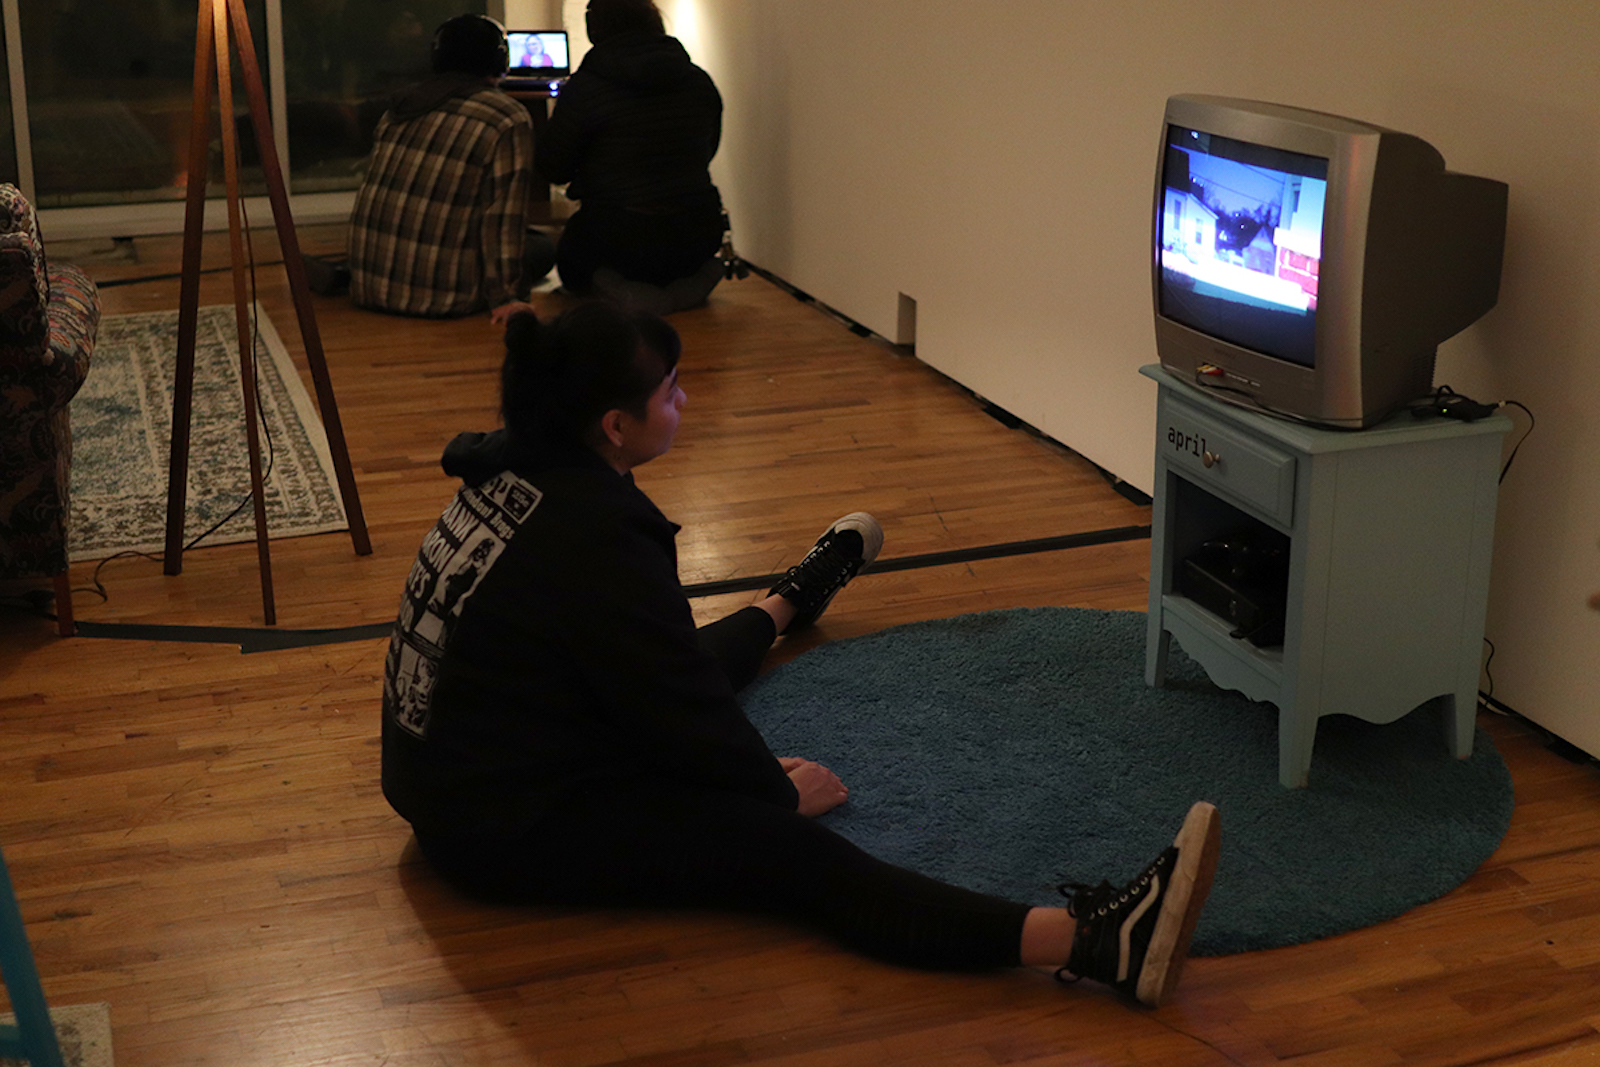 A woman sitting on the floor watching a video on a small tv